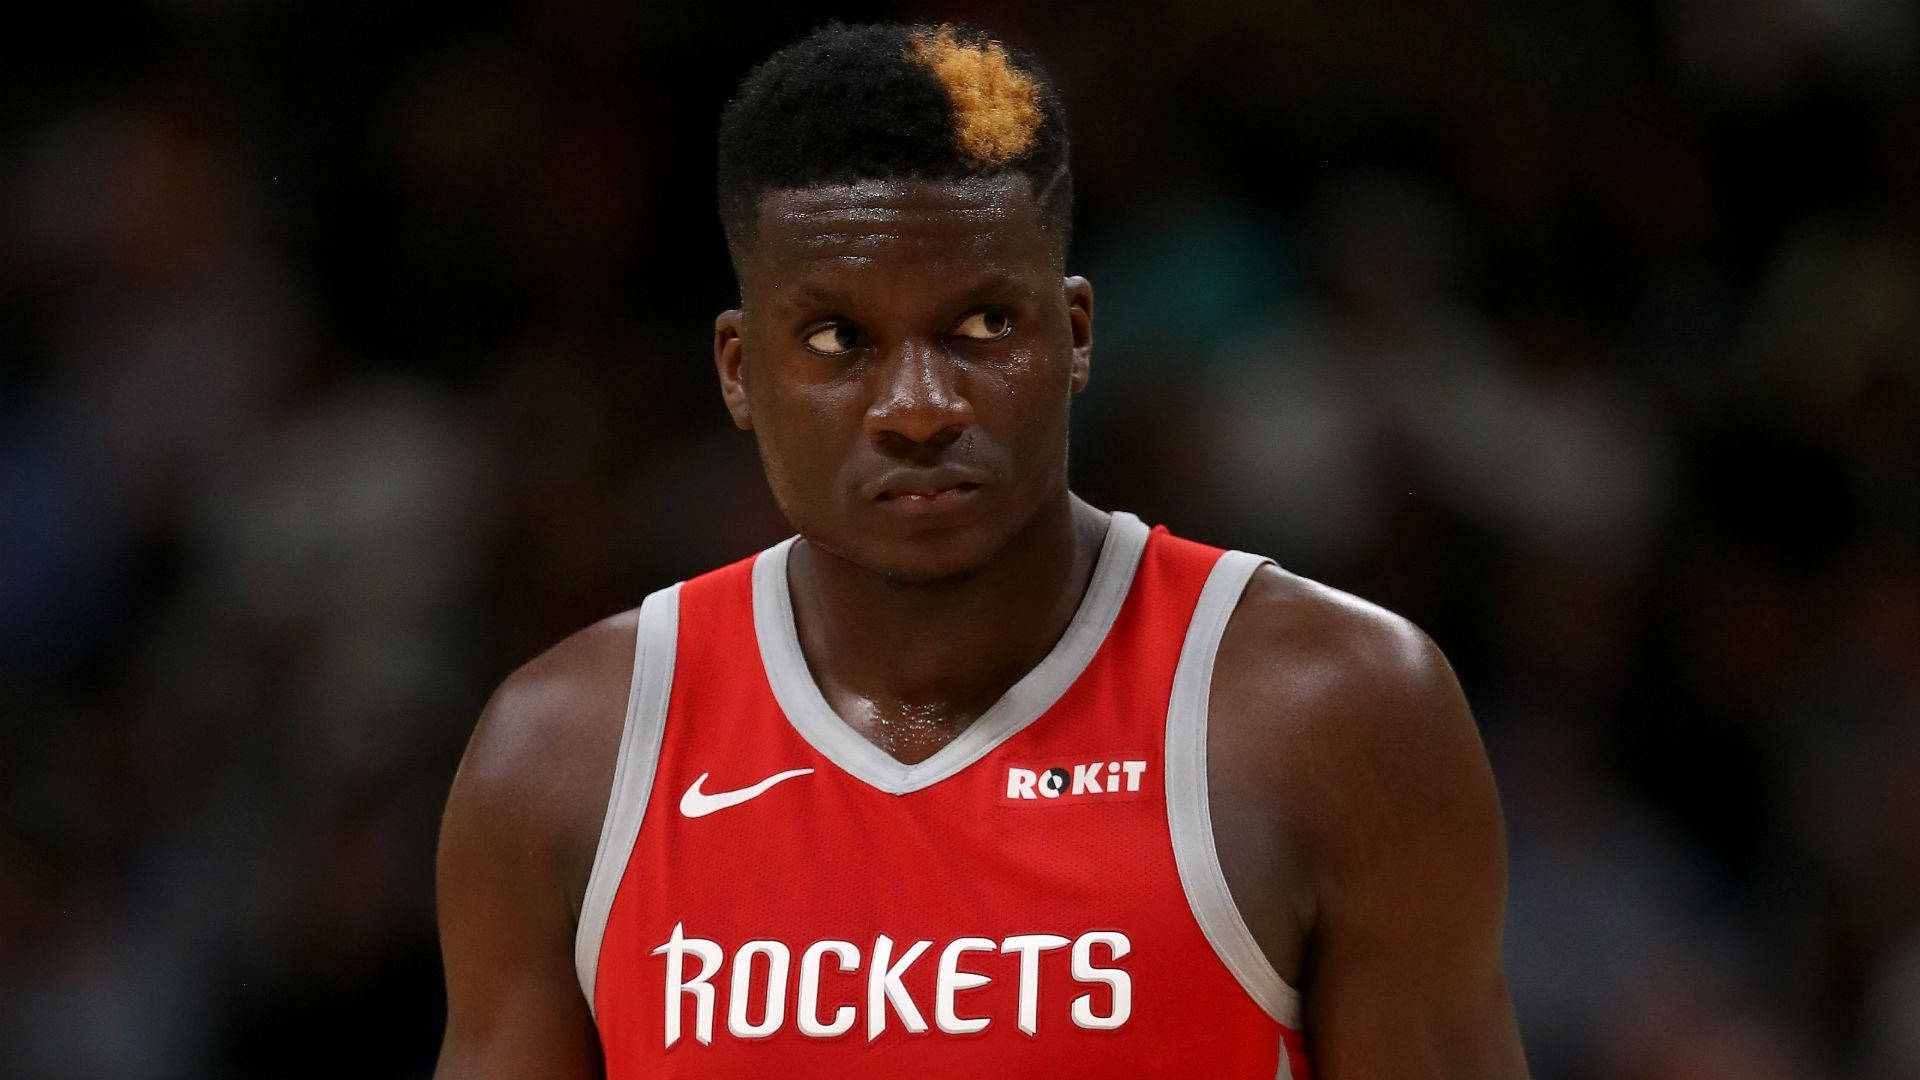 Nba Star Clint Capela Engaged In An Intense Game Background